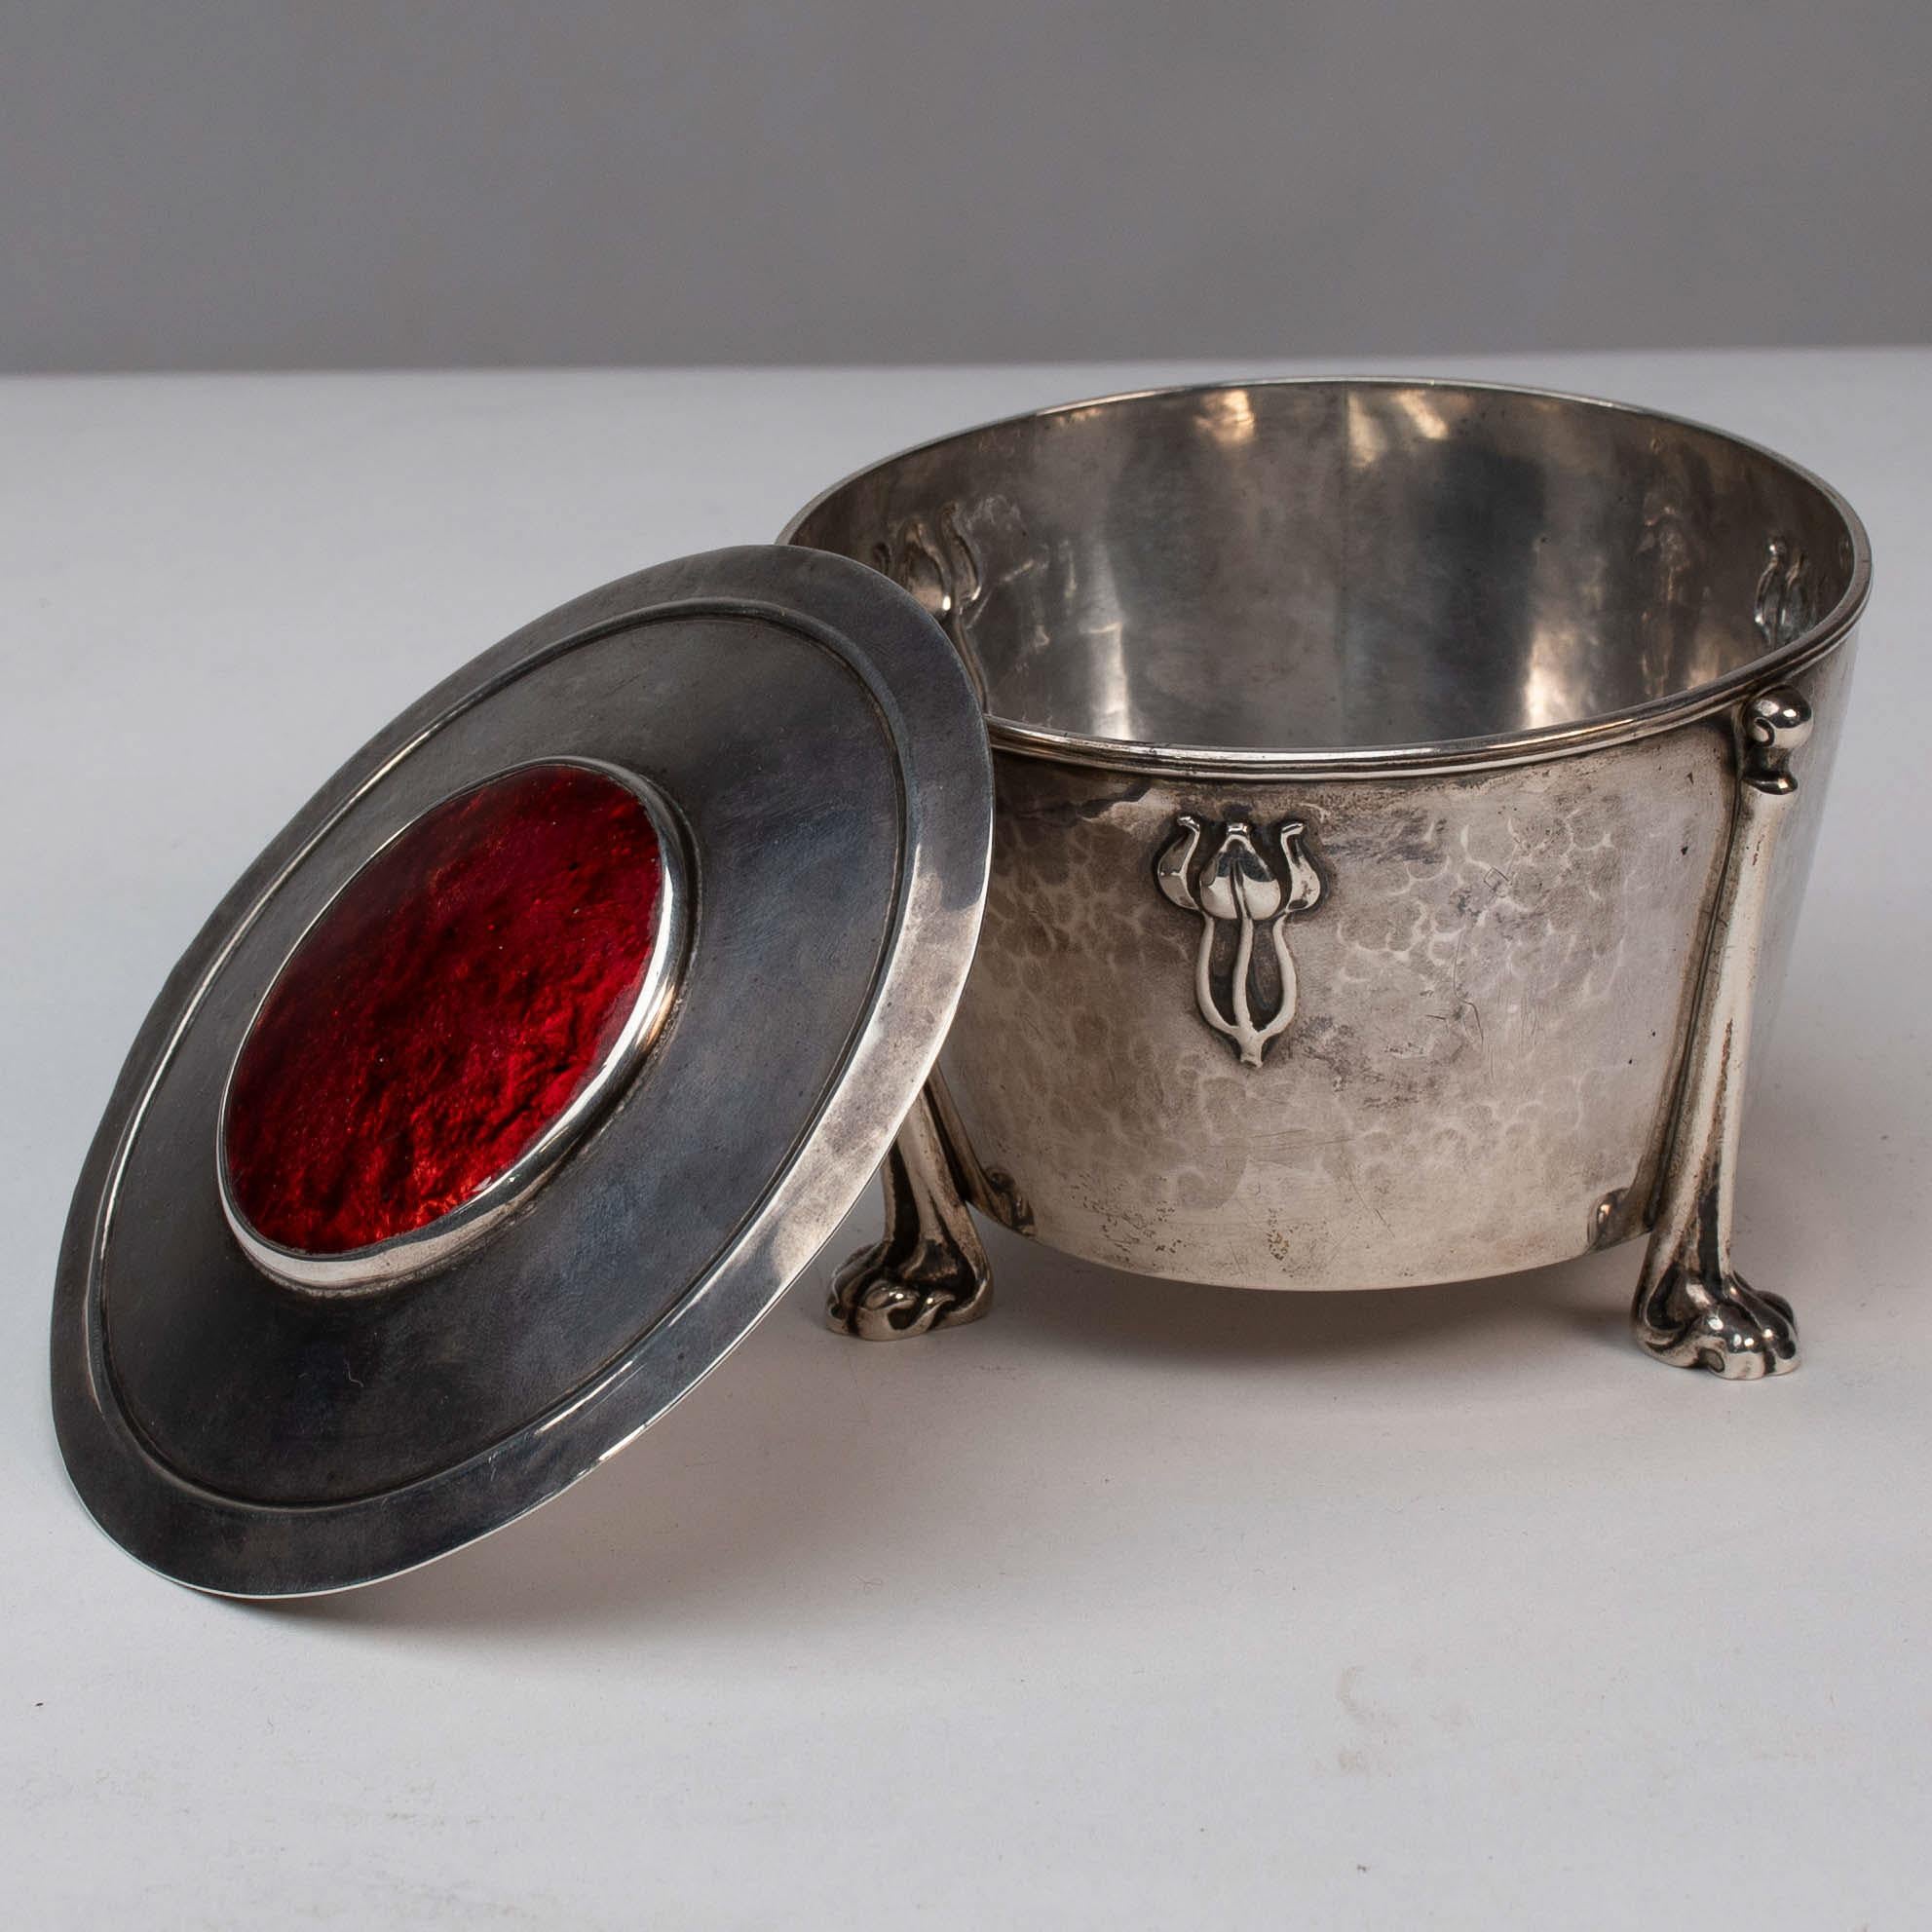 Edith Dawson. An Arts & Crafts Silver Pot with Floral Details & A Red Enamel Lid In Good Condition For Sale In London, GB